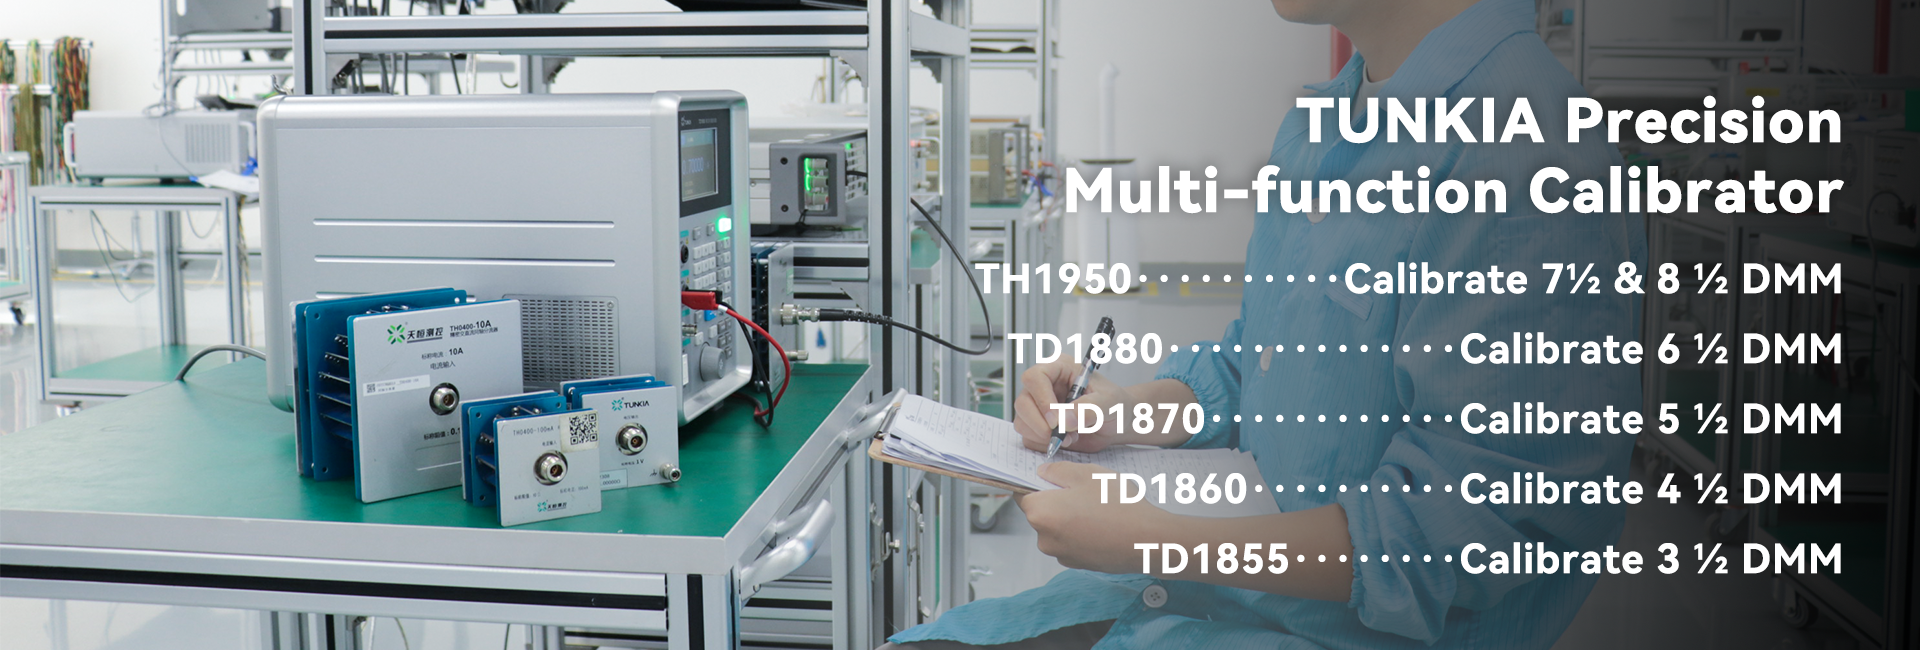 TUNKIA multifunction calibrator product system for multimeter calibration